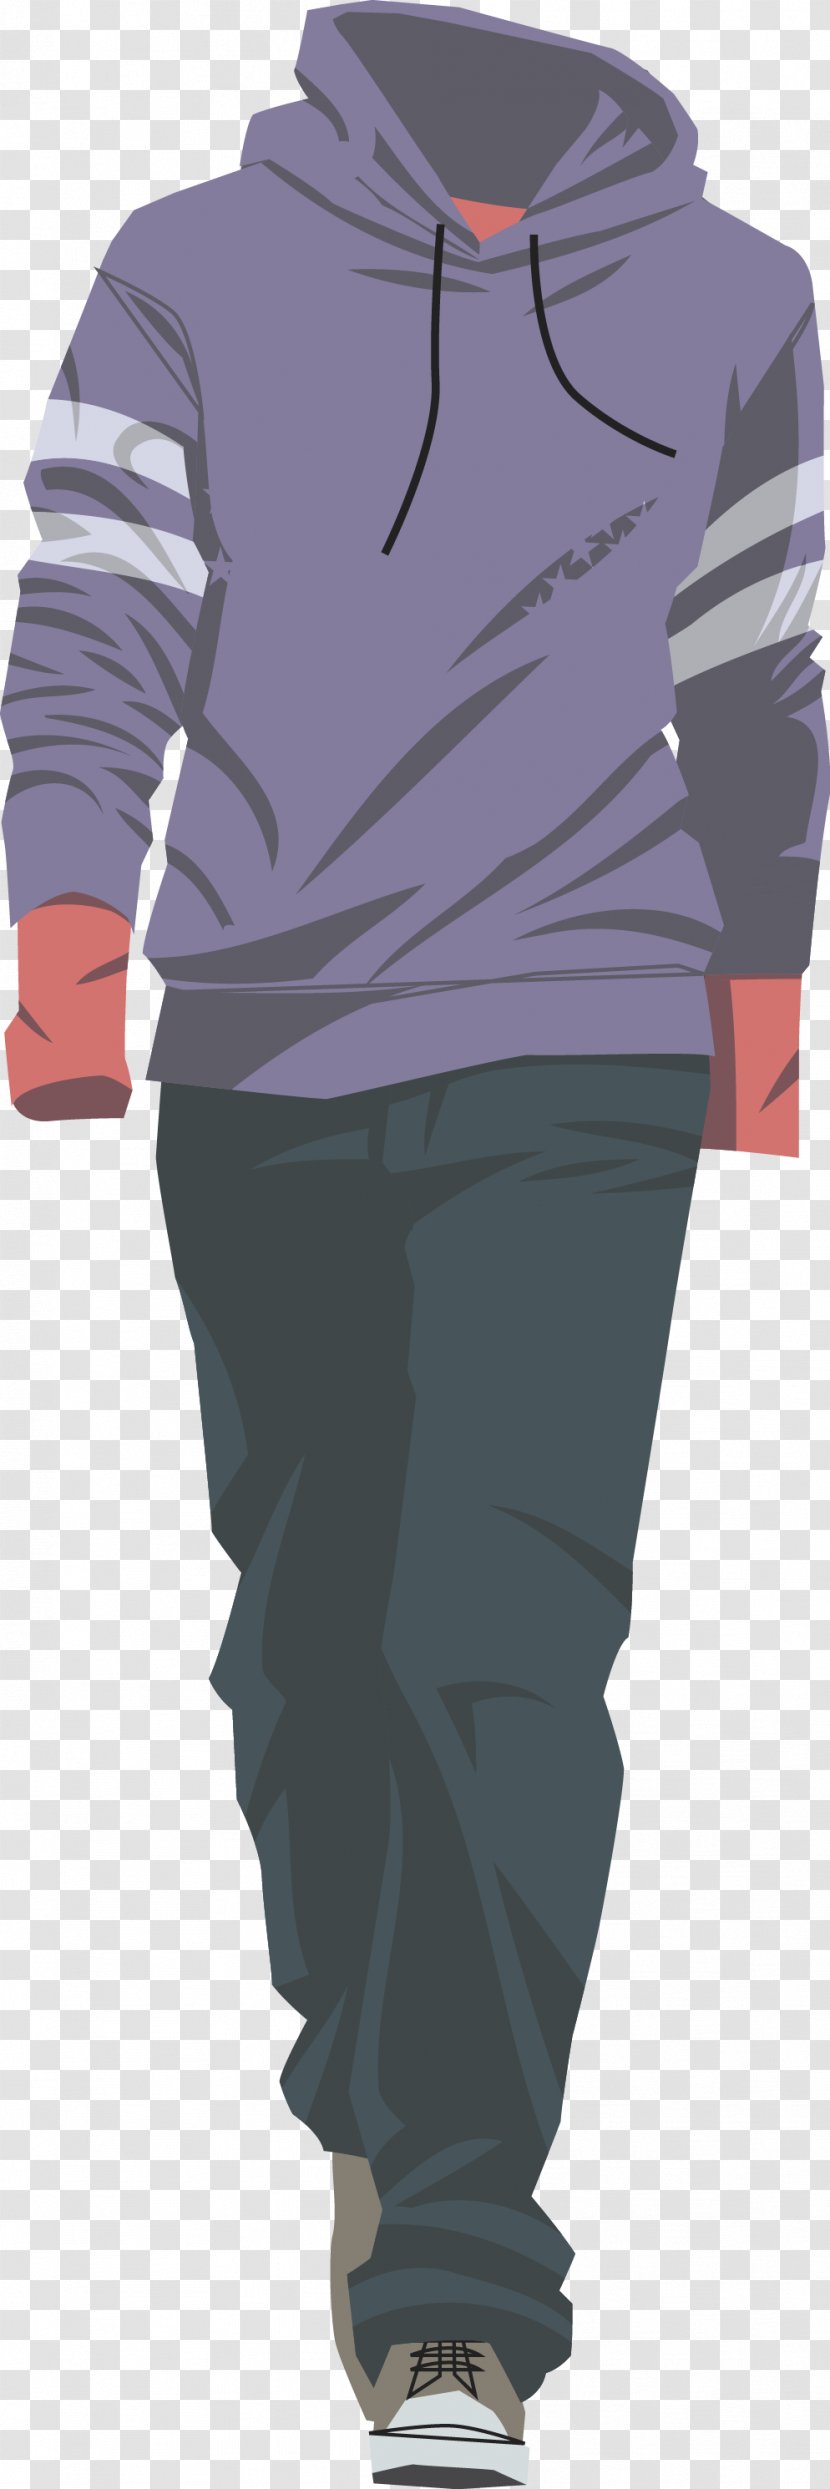 Model - Clothing - Autumn Outfit For Men Transparent PNG